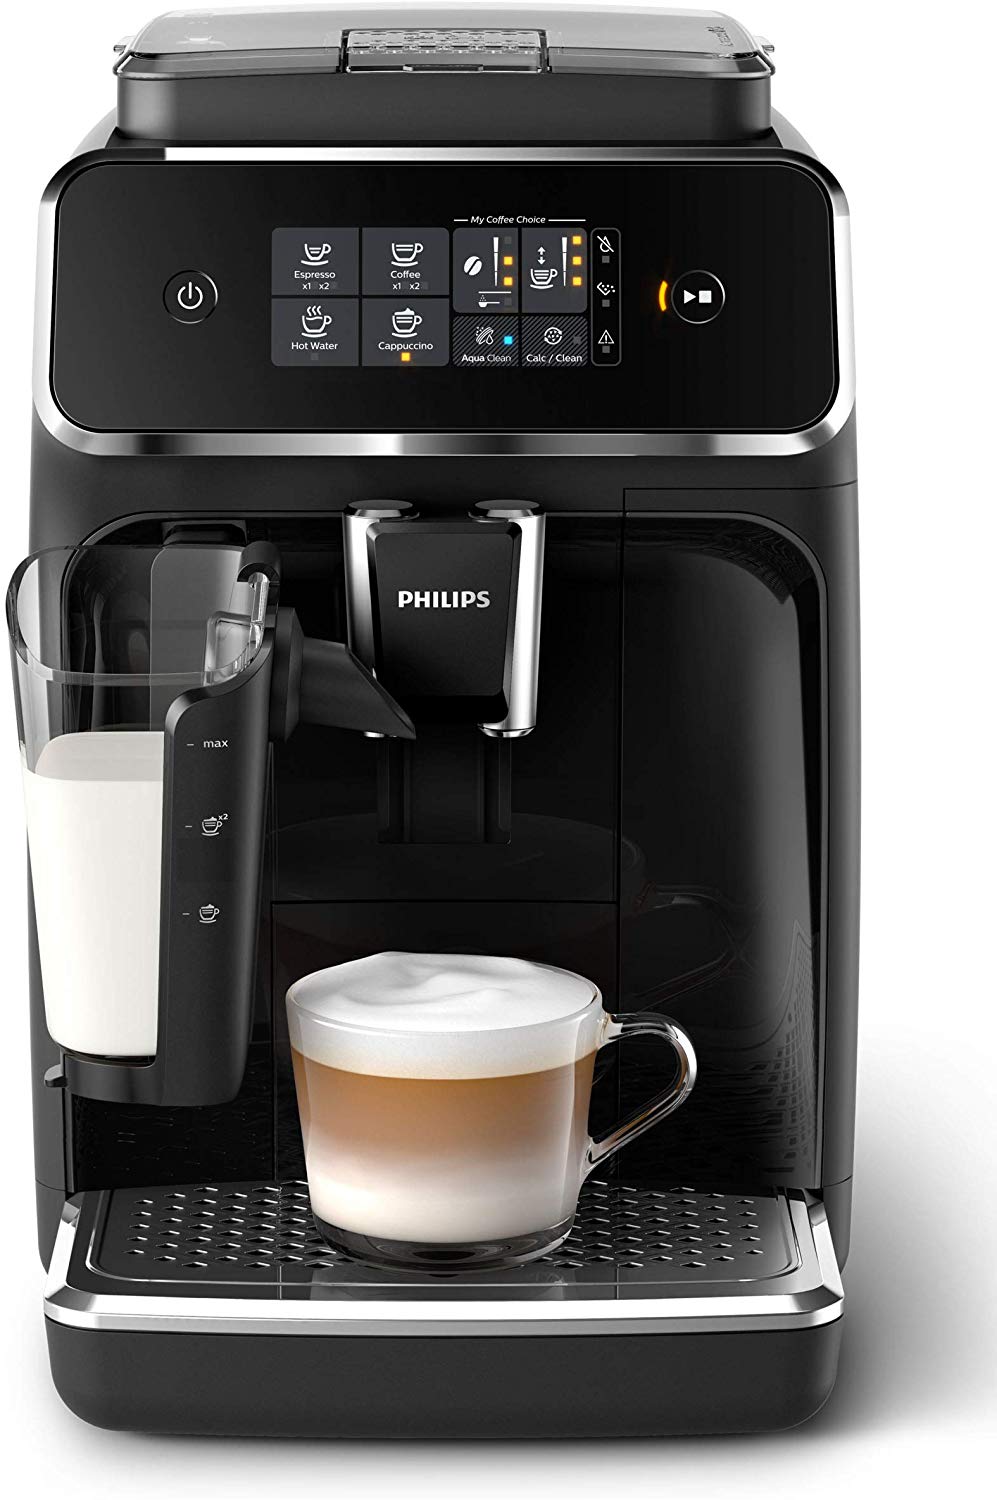 Philips 2200 Series Ep2231 / 40 Fully Automatic Coffee Machine, 3 Coffee Sp